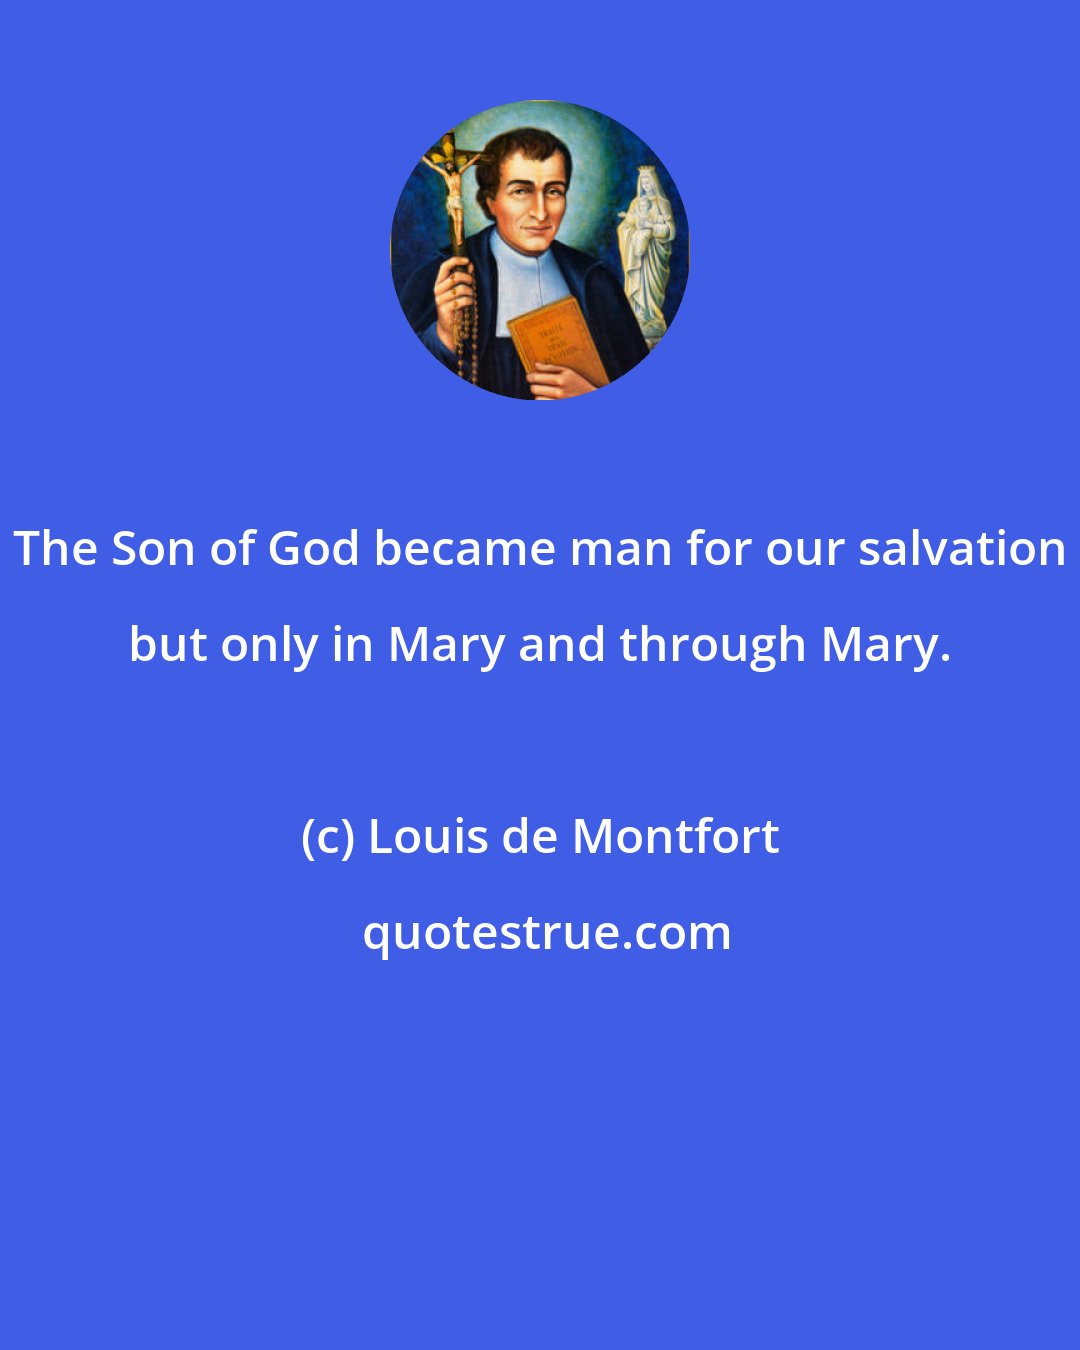 Louis de Montfort: The Son of God became man for our salvation but only in Mary and through Mary.